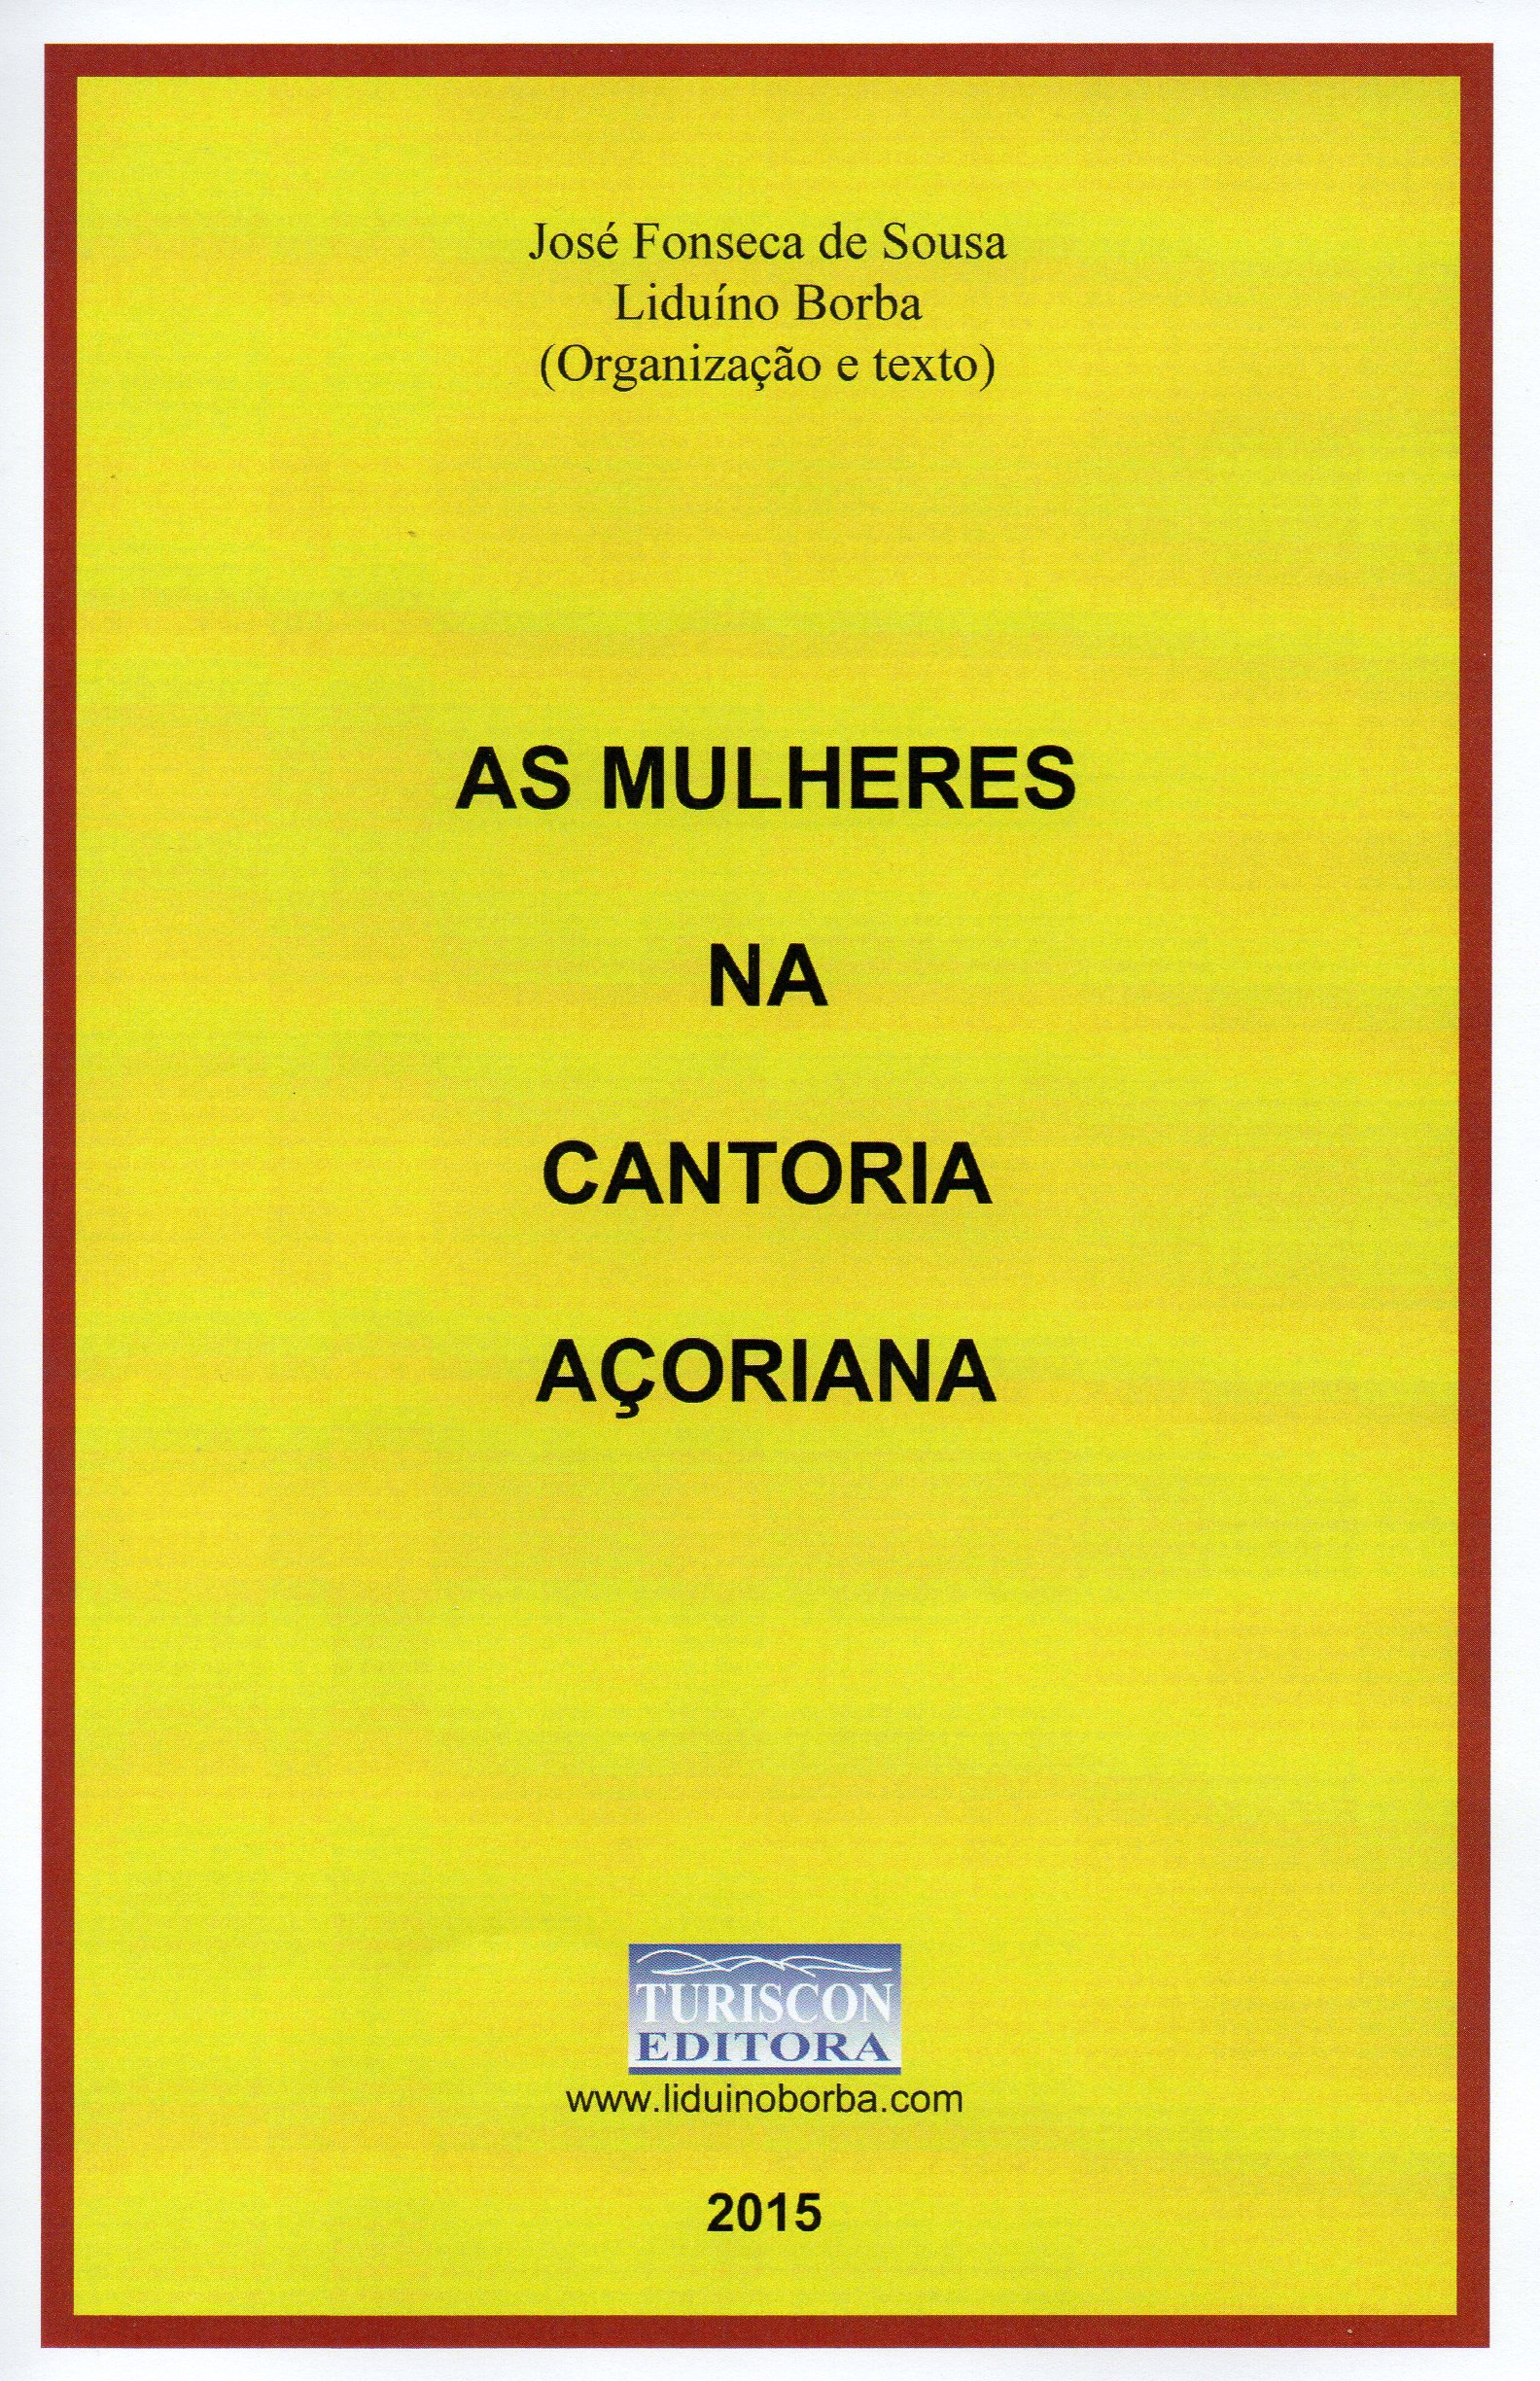 041 1033 As Mulheres na Cantoria, 2015